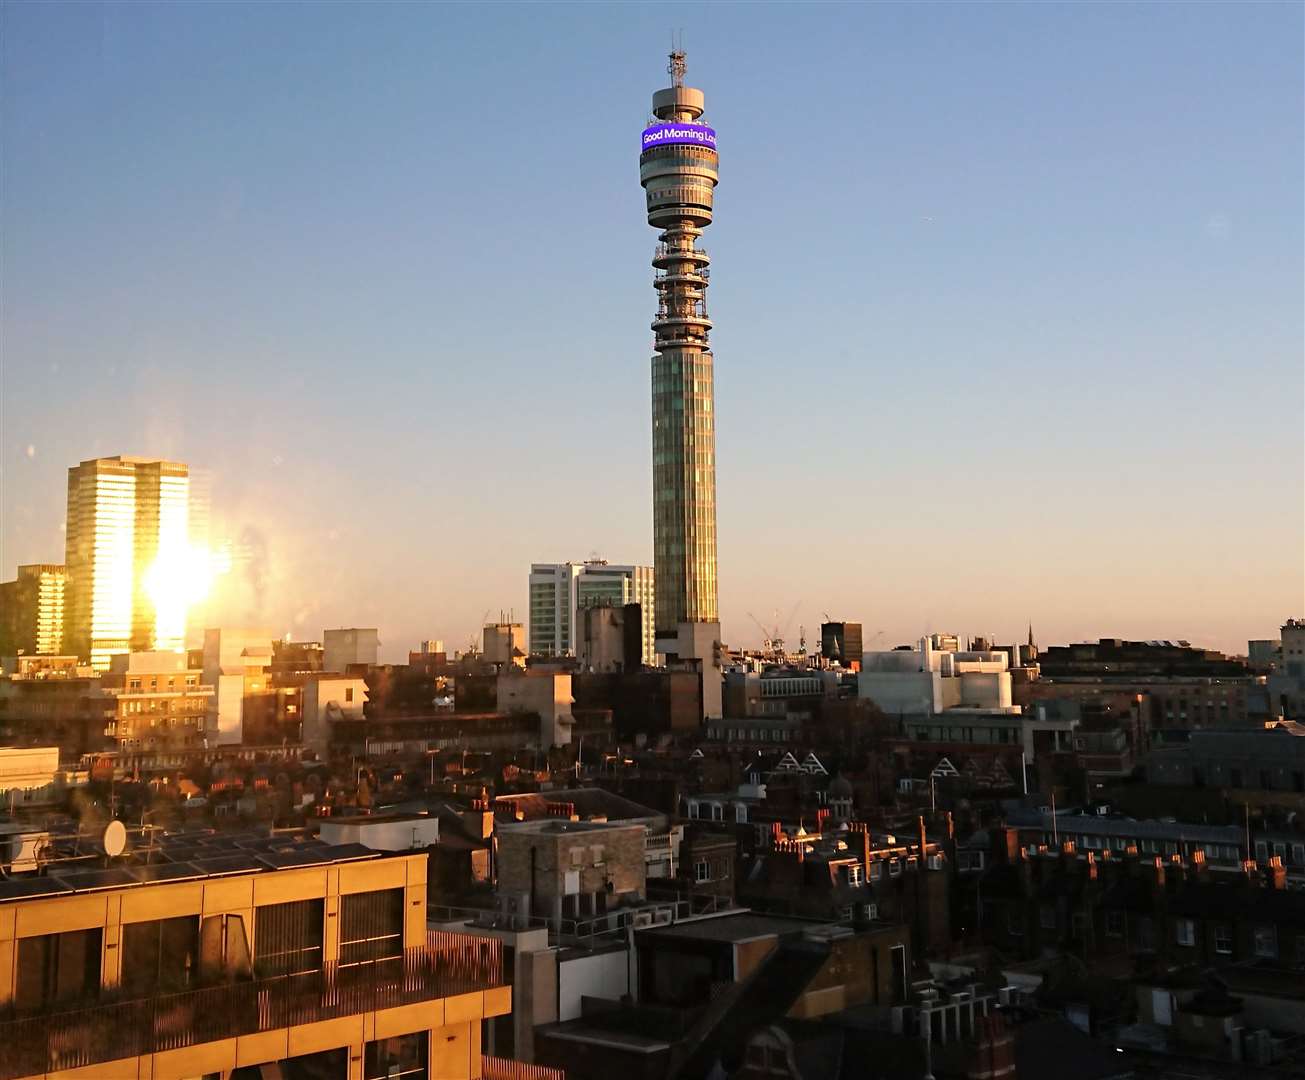 The sunrise reflects off Euston Tower as the BT Tower said "Good Morning London" on Sunday - the view from our room at Treehouse London